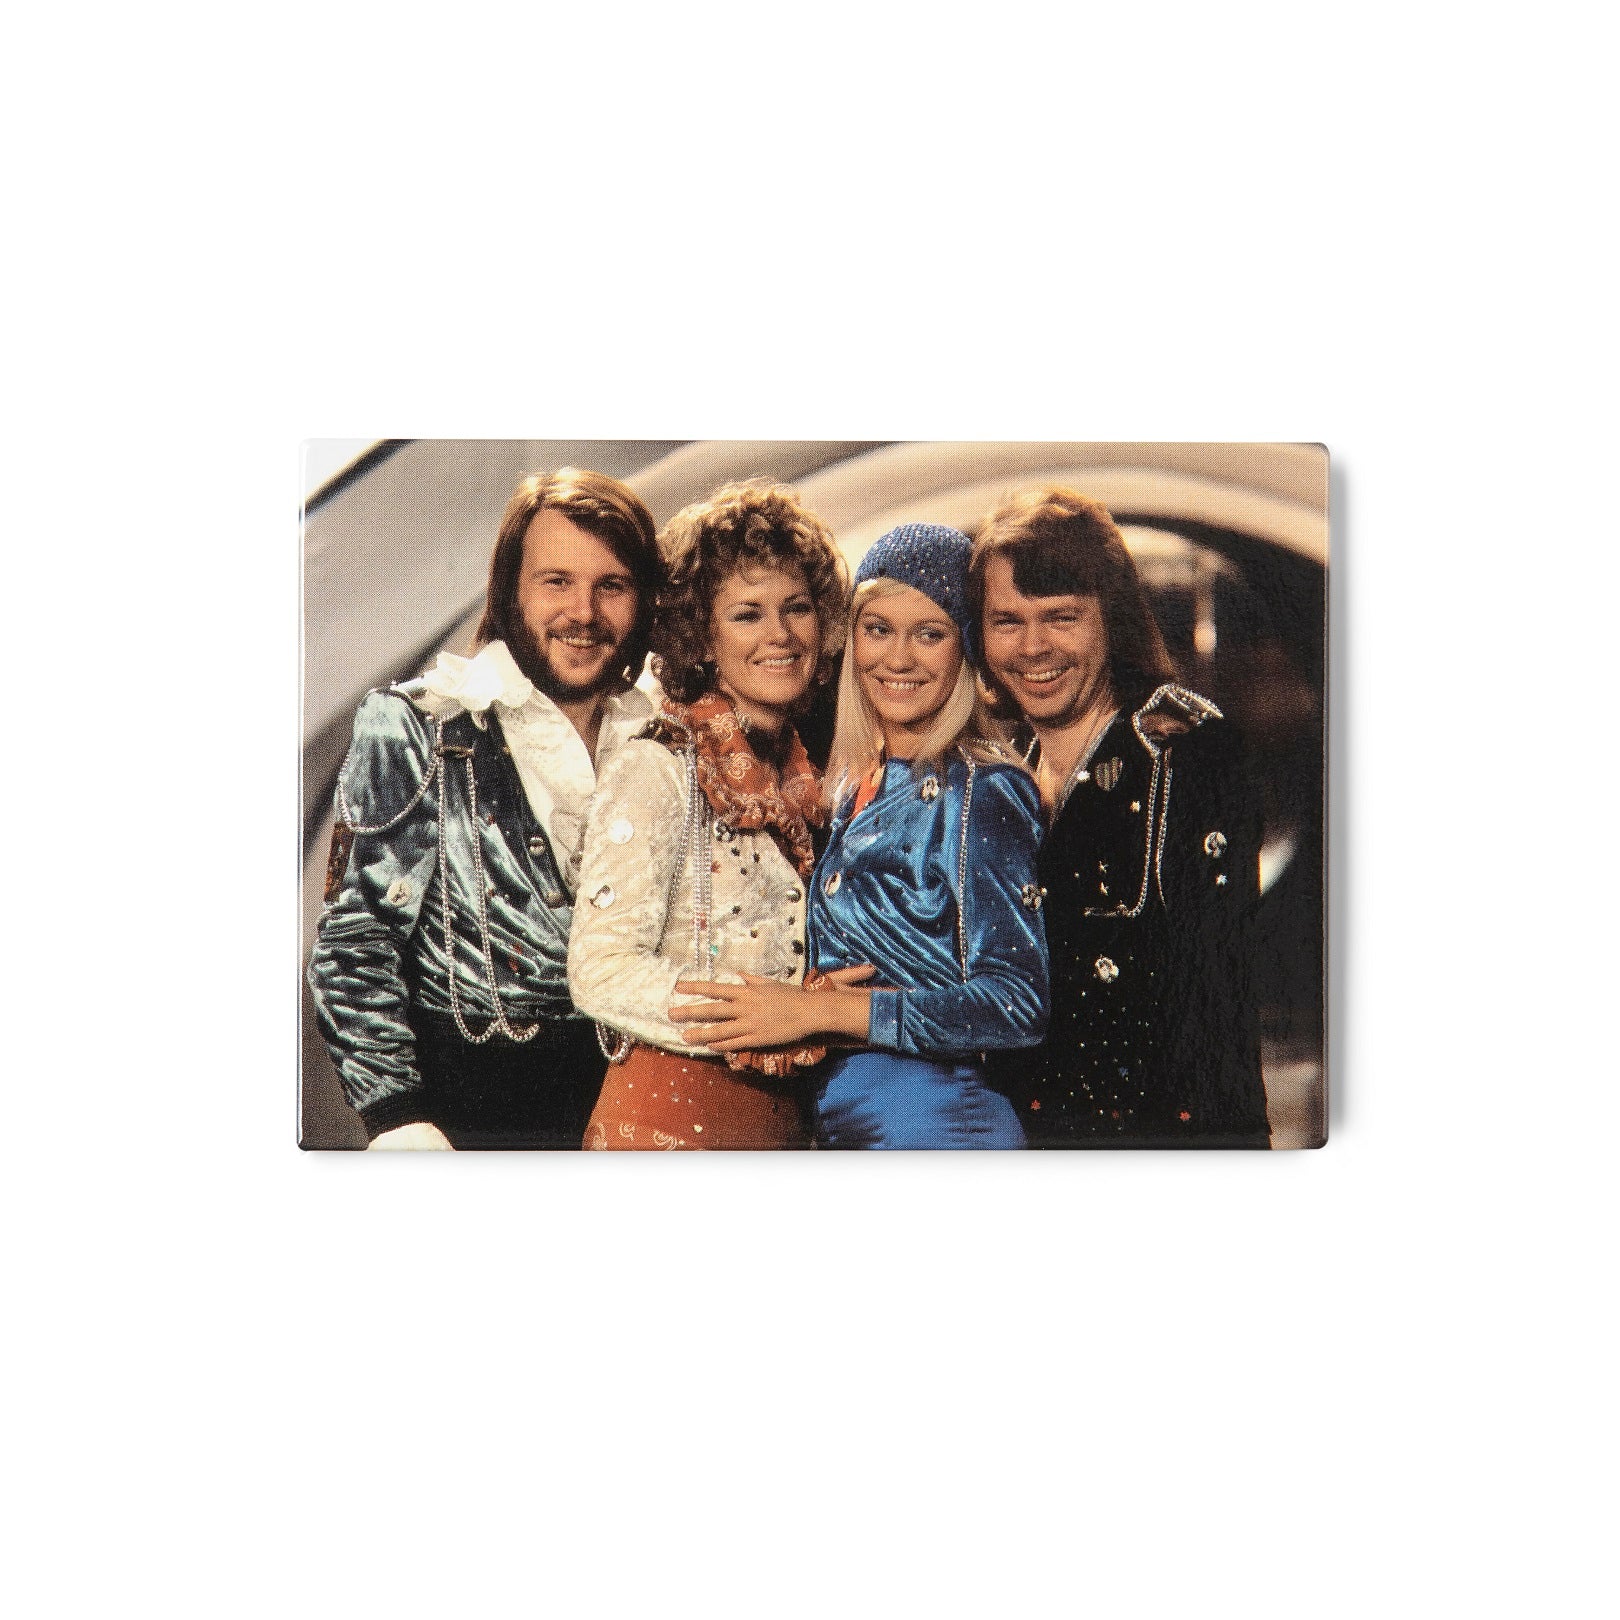 ABBA Waterloo on stage magnet